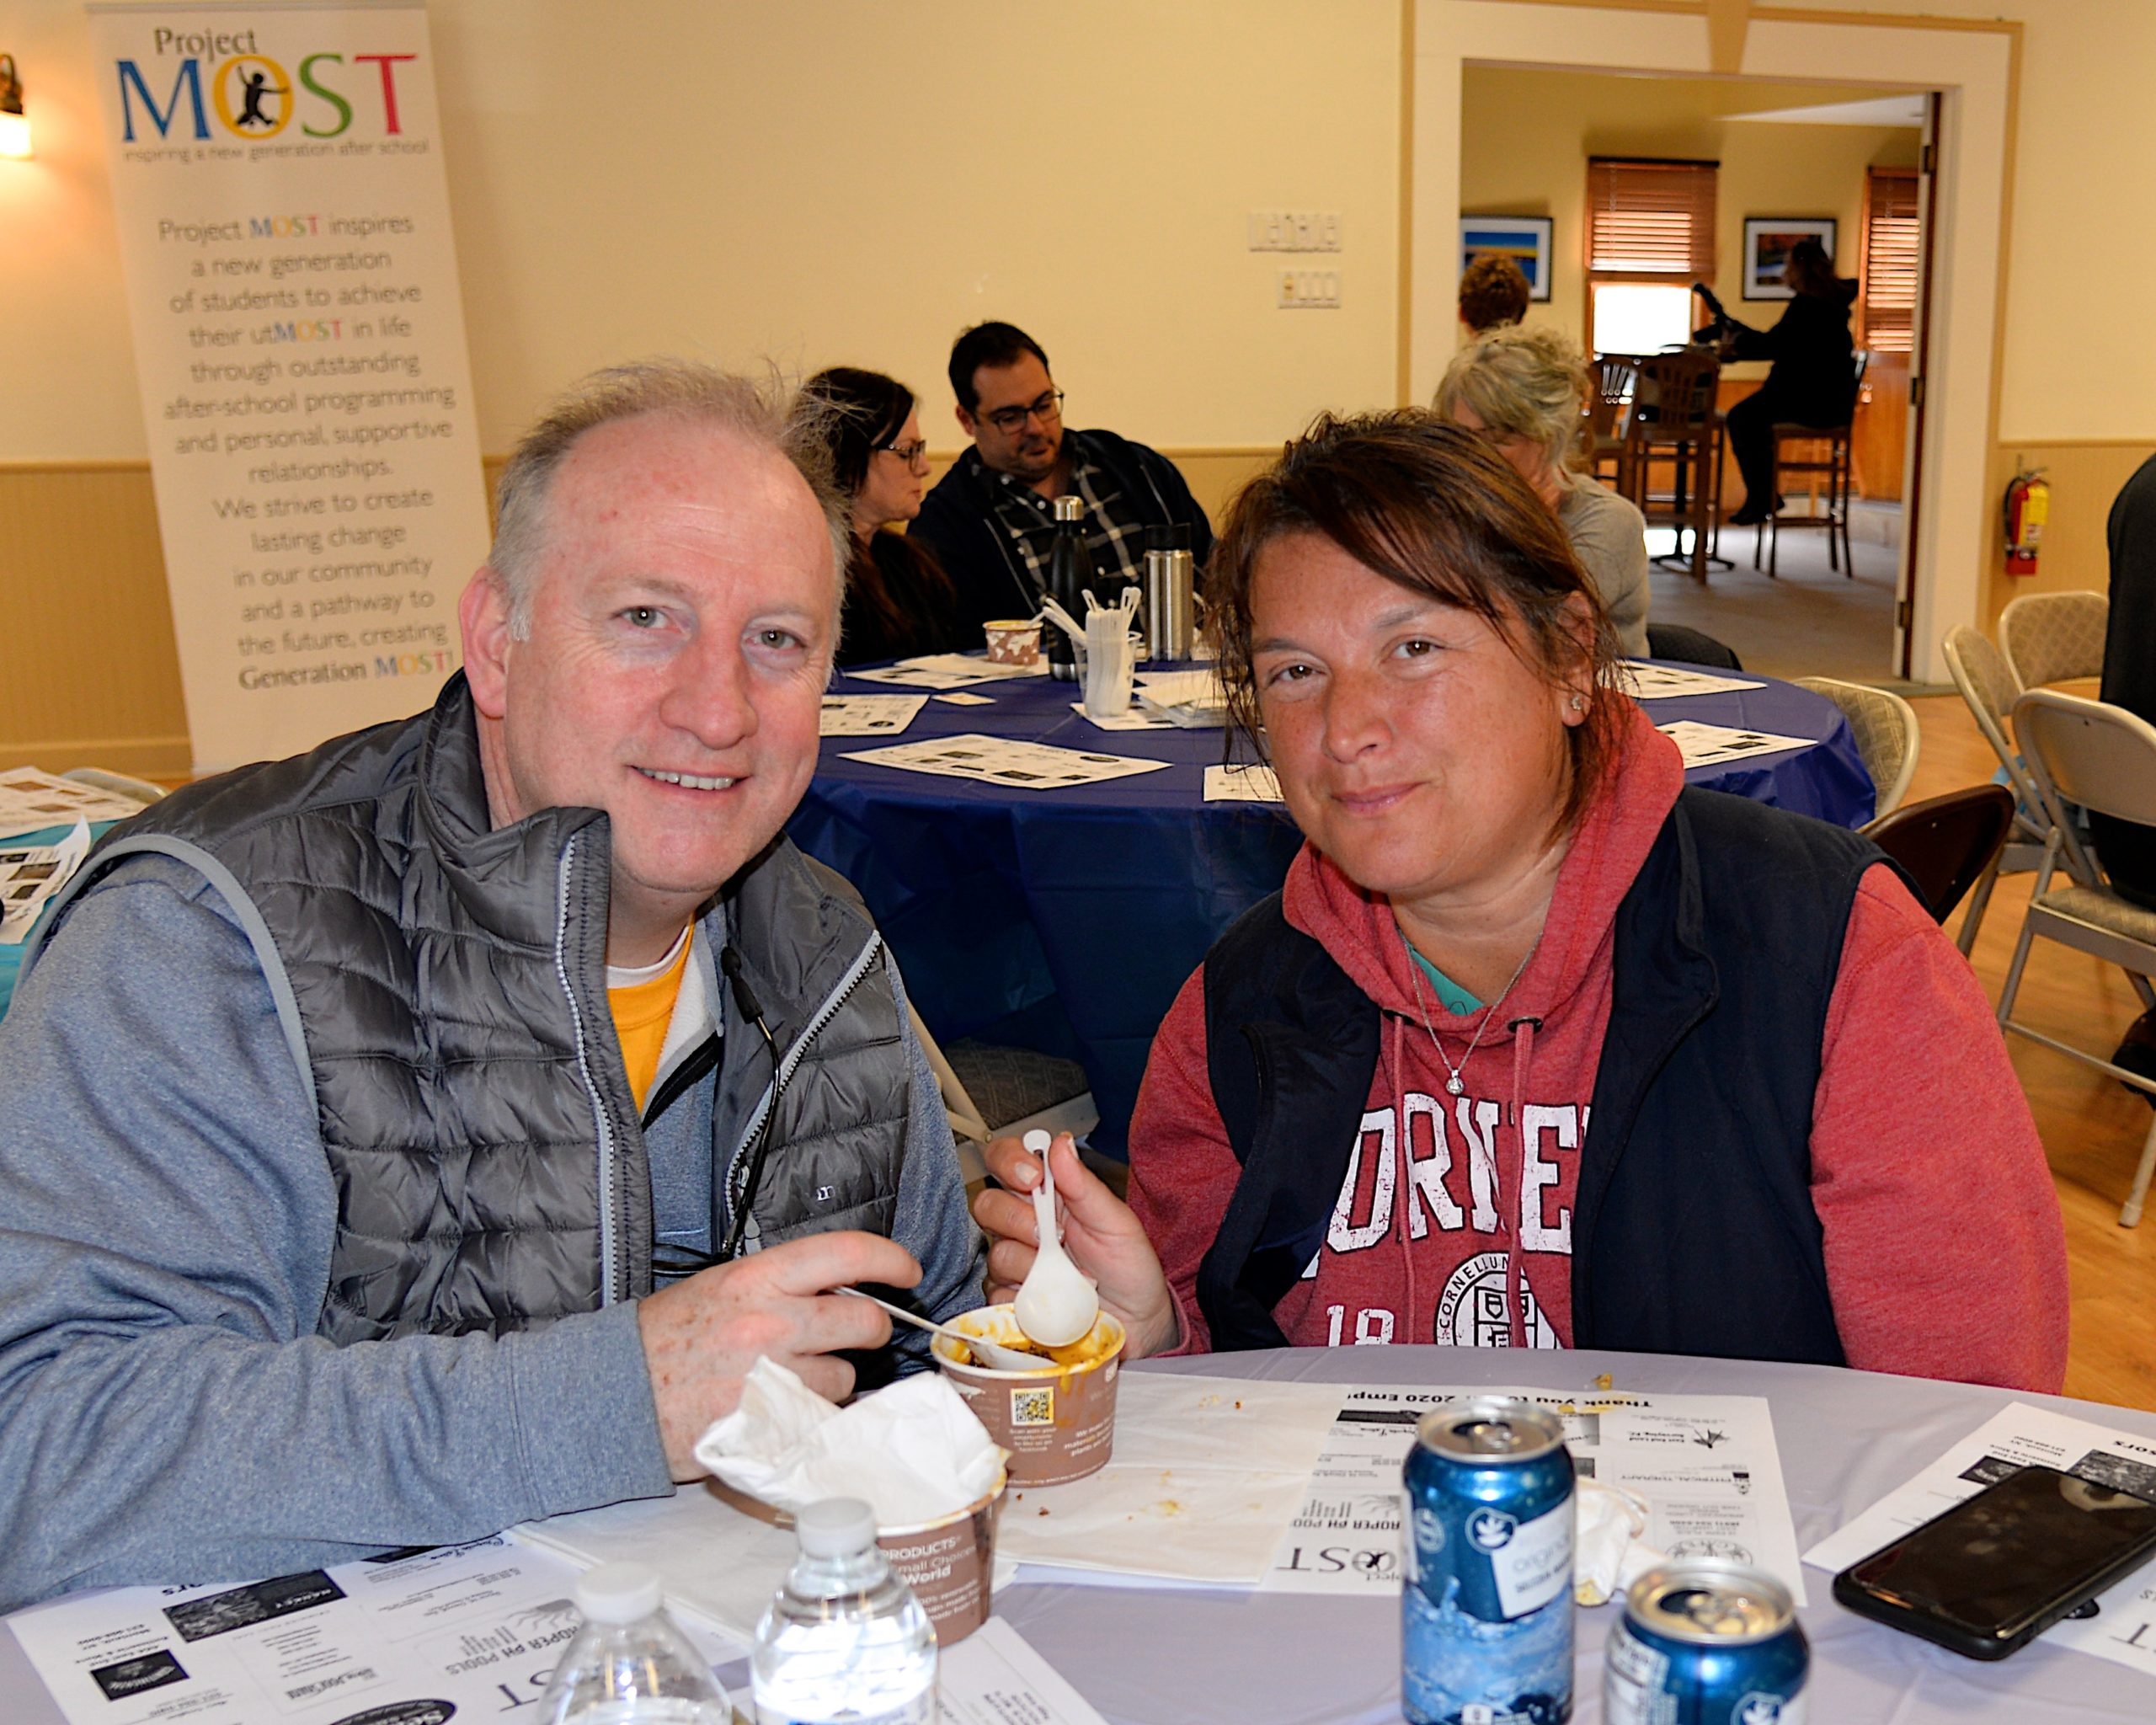 Empty Bowls, a fundraiser for Project Most, with soups from local chefs and restaurants took place at the Amagansett American Legion hall on Sunday.  Brian and Mariela Raeburn turned out for the cause. KYRIL BROMLEY